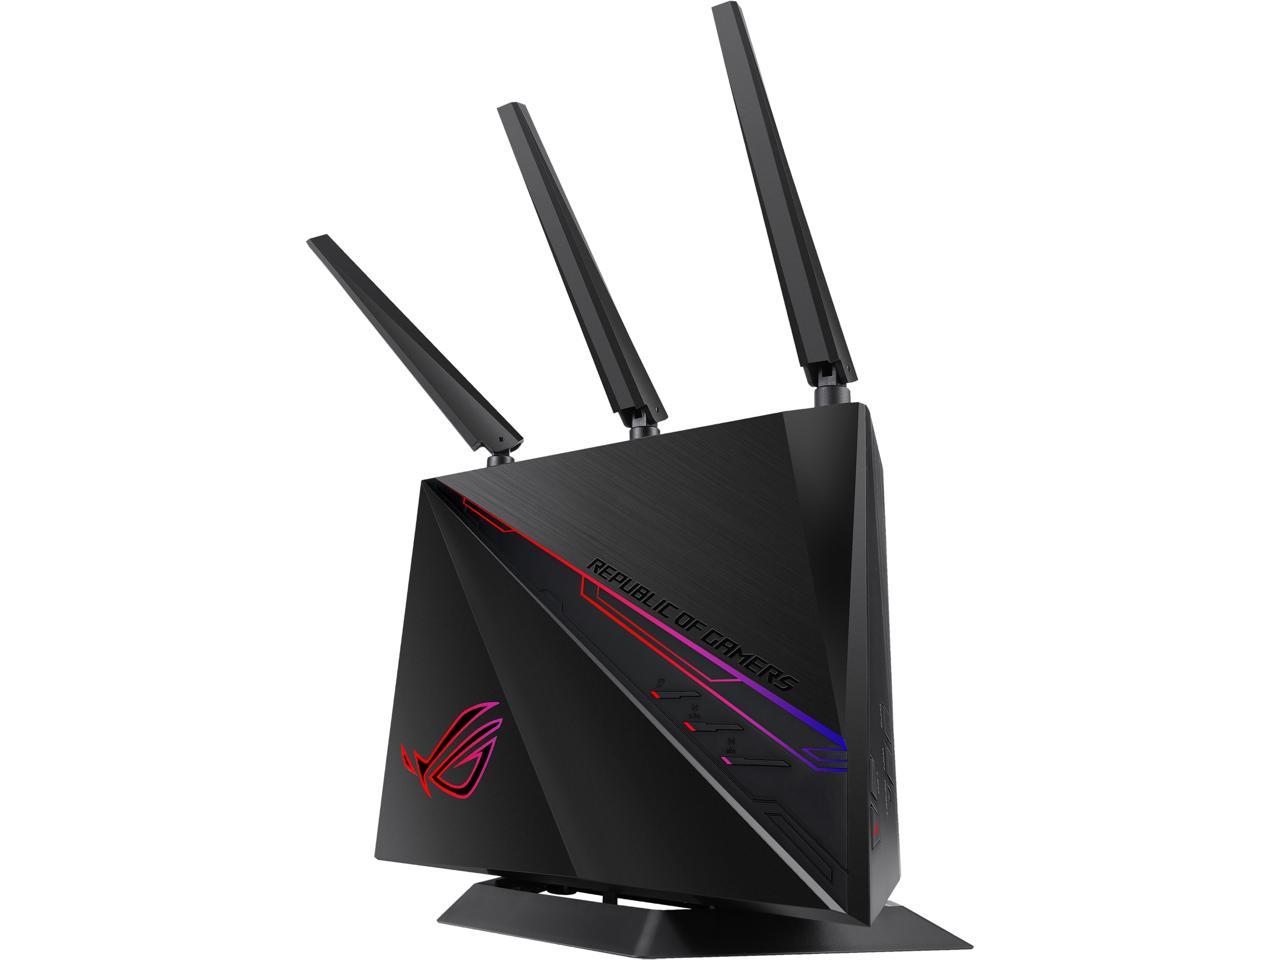 ASUS ROG (GT-AC2900) Dual-Band Wireless Gigabit Wi-Fi Gaming Router - GeForce NOW Optimization with Triple-Level Game Acceleration, 4 x LAN, 1 x USB 3.0, 1 x USB 2.0 Compatible with AiMesh